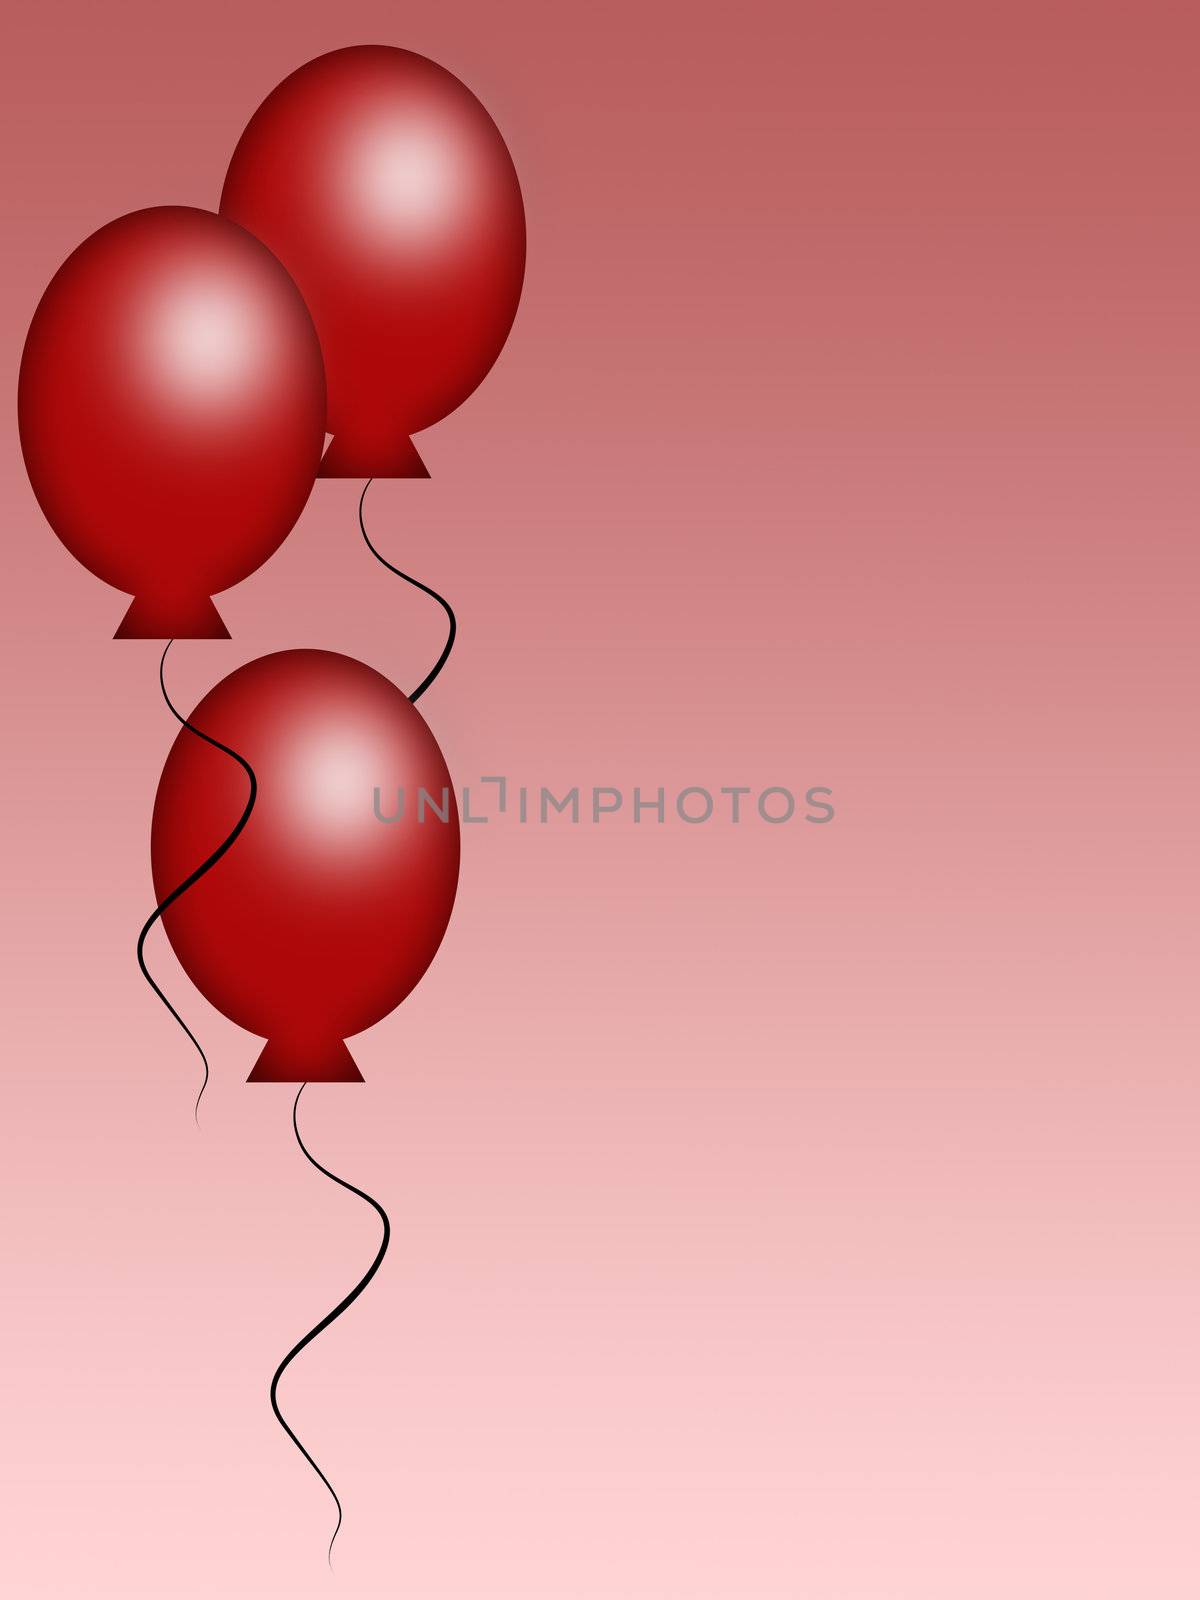 Three red balloons on a pink background